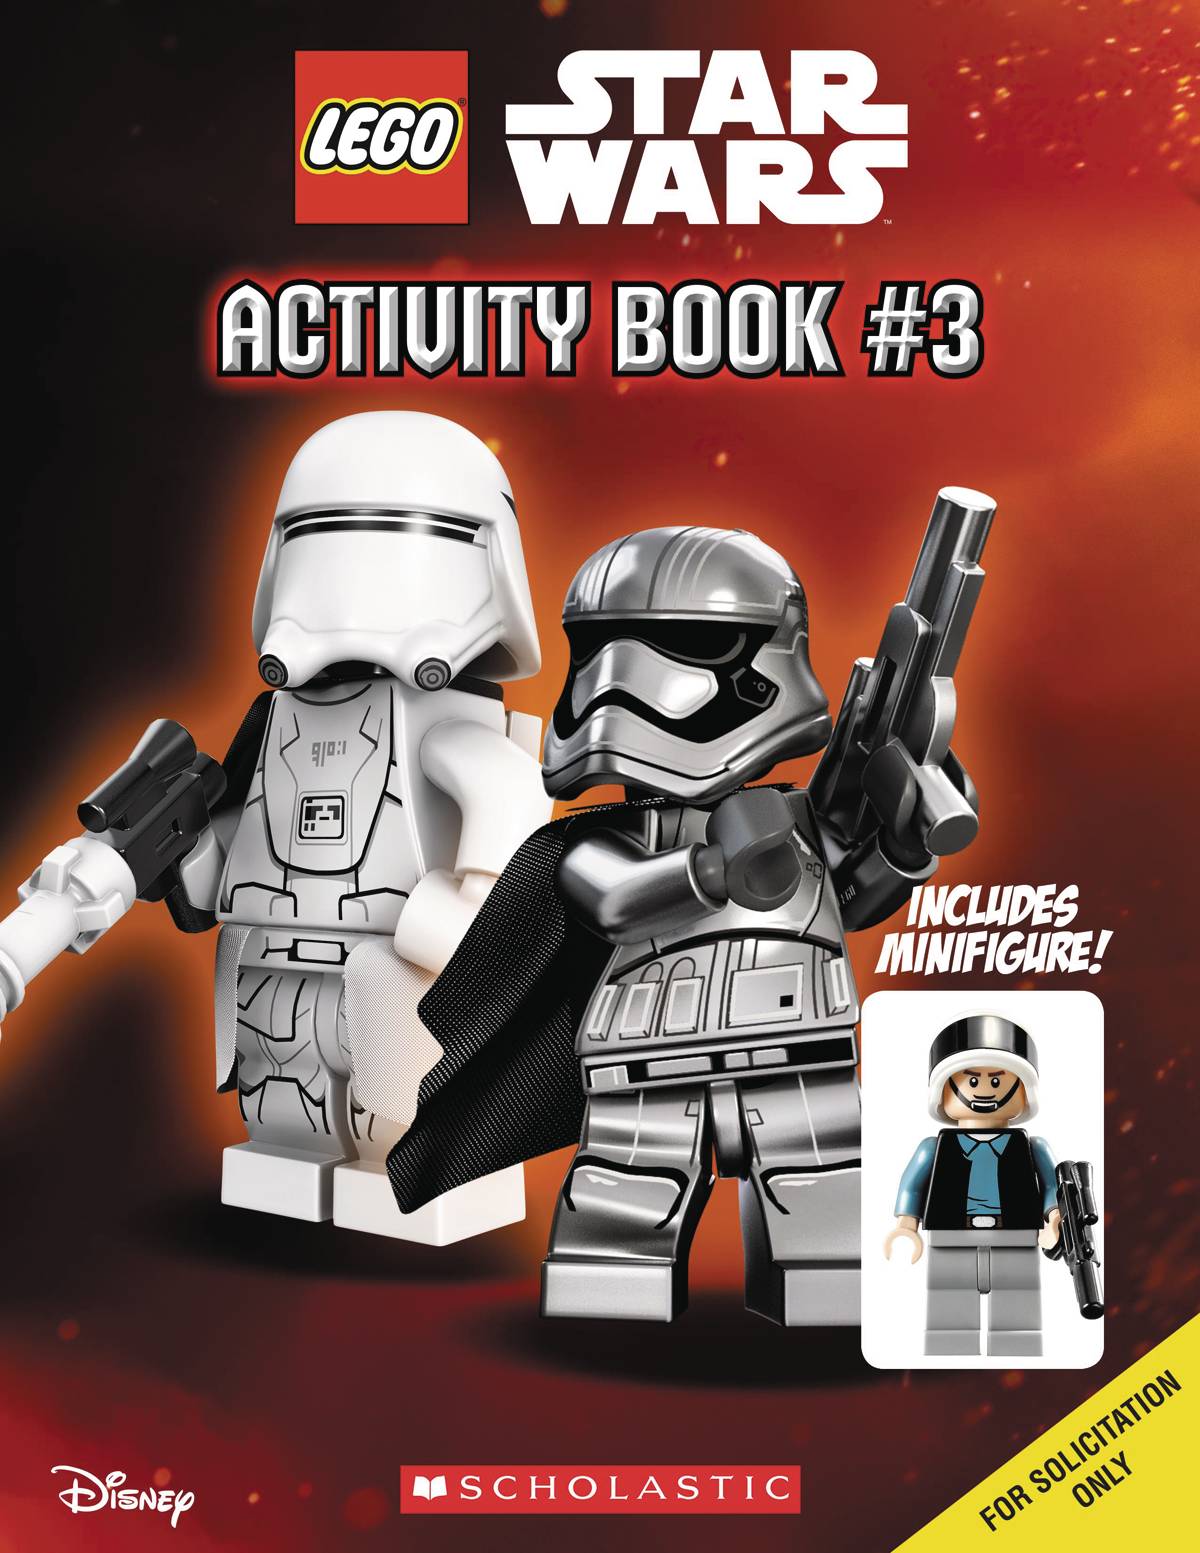 Lego Star Wars Activity Book With Figure #3